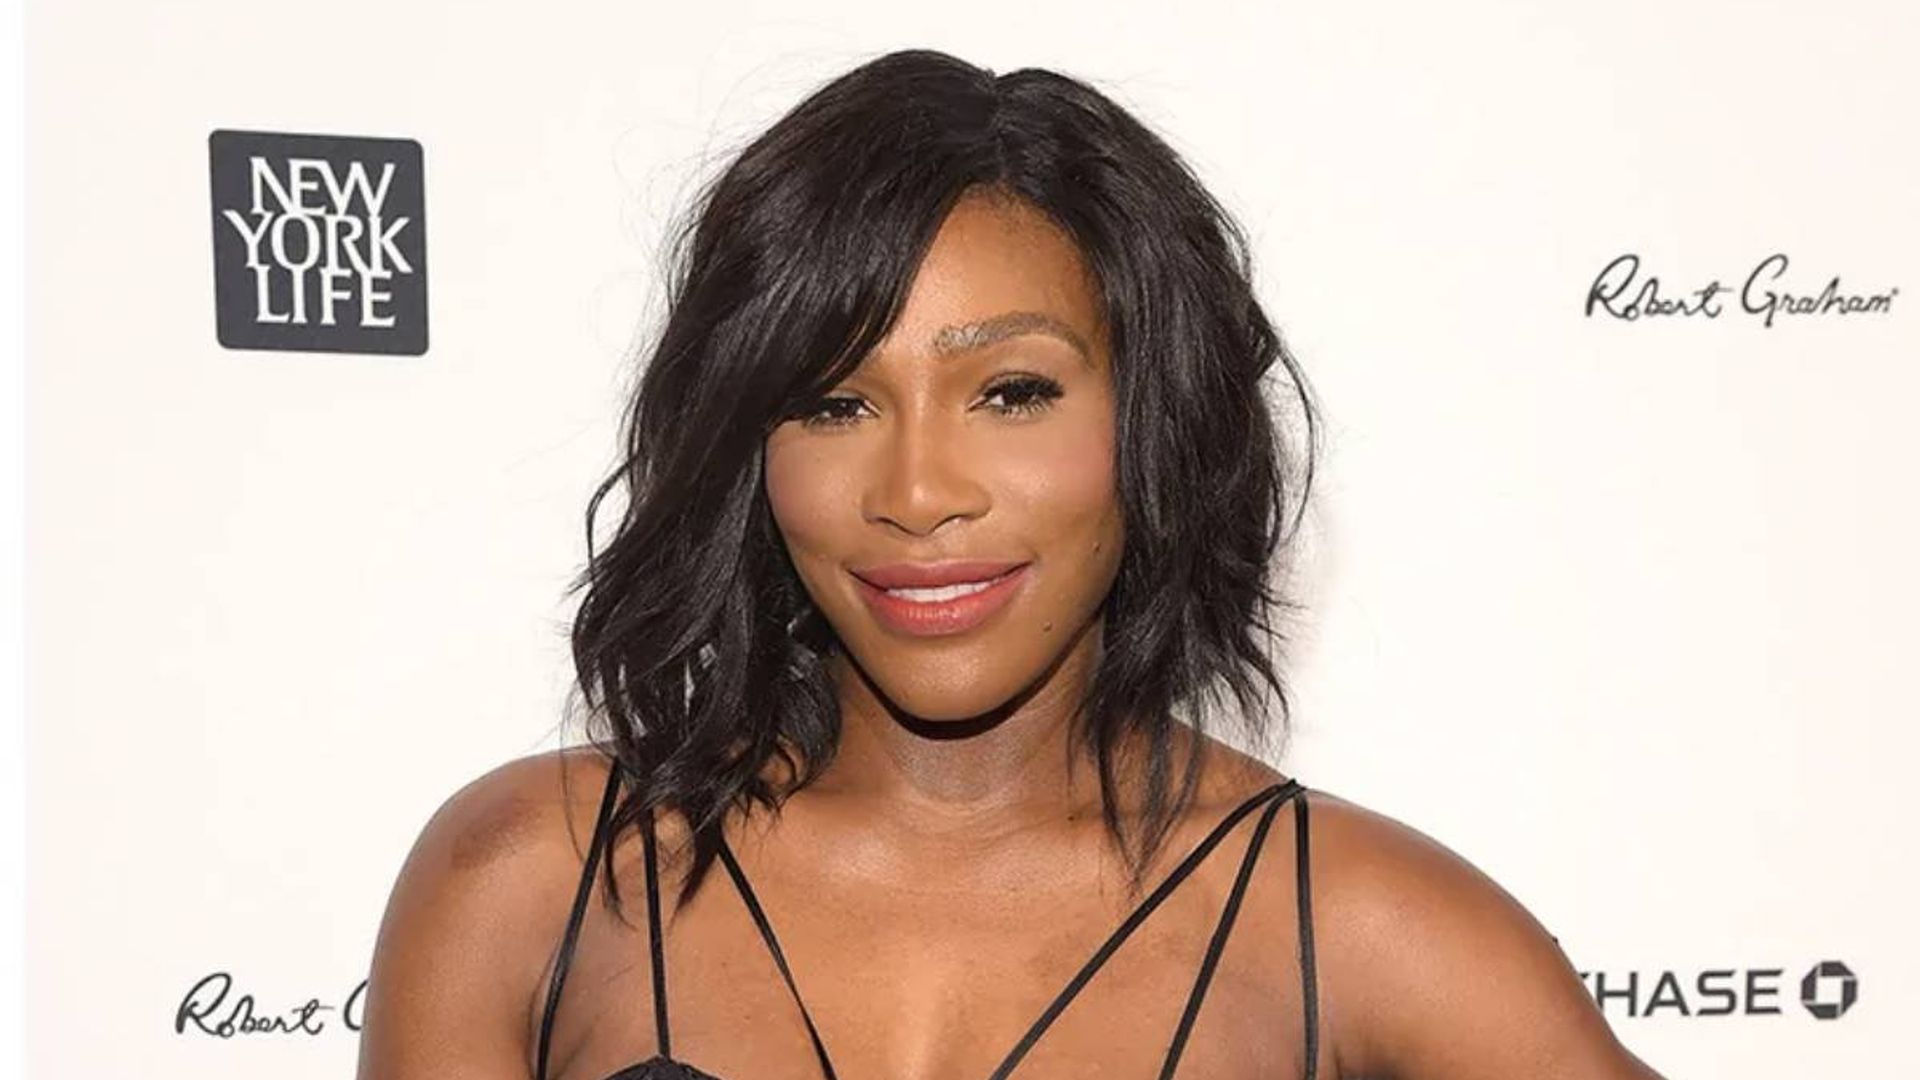 Serena Williams sets Instagram on fire in a body-skimming dress you need to see